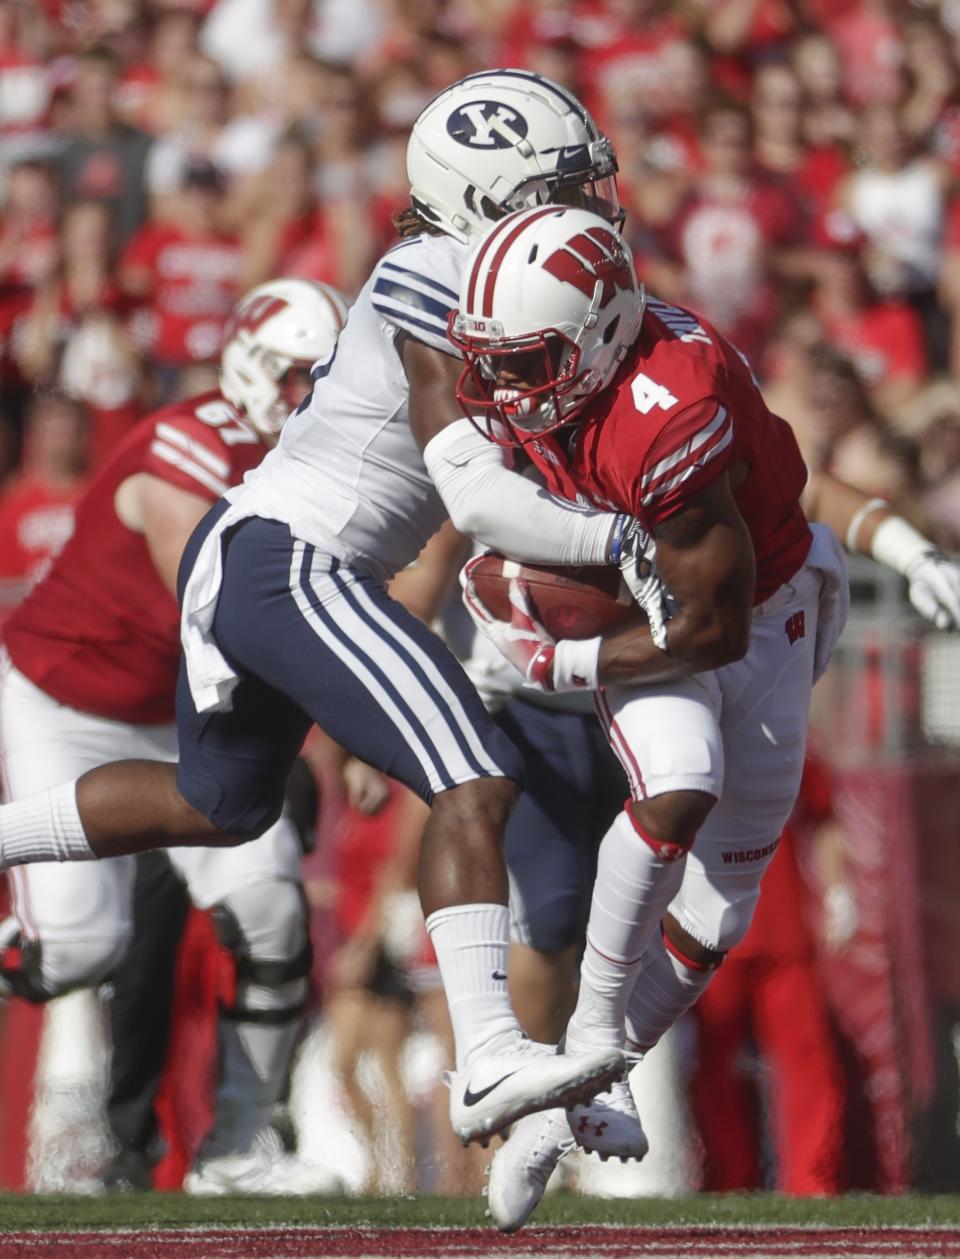 Wisconsin's A.J. Taylor catches a pass in front of BYU's Dayan Ghanwoloku during the first half of an NCAA college football game Saturday, Sept. 15, 2018, in Madison, Wis. (AP Photo/Morry Gash)